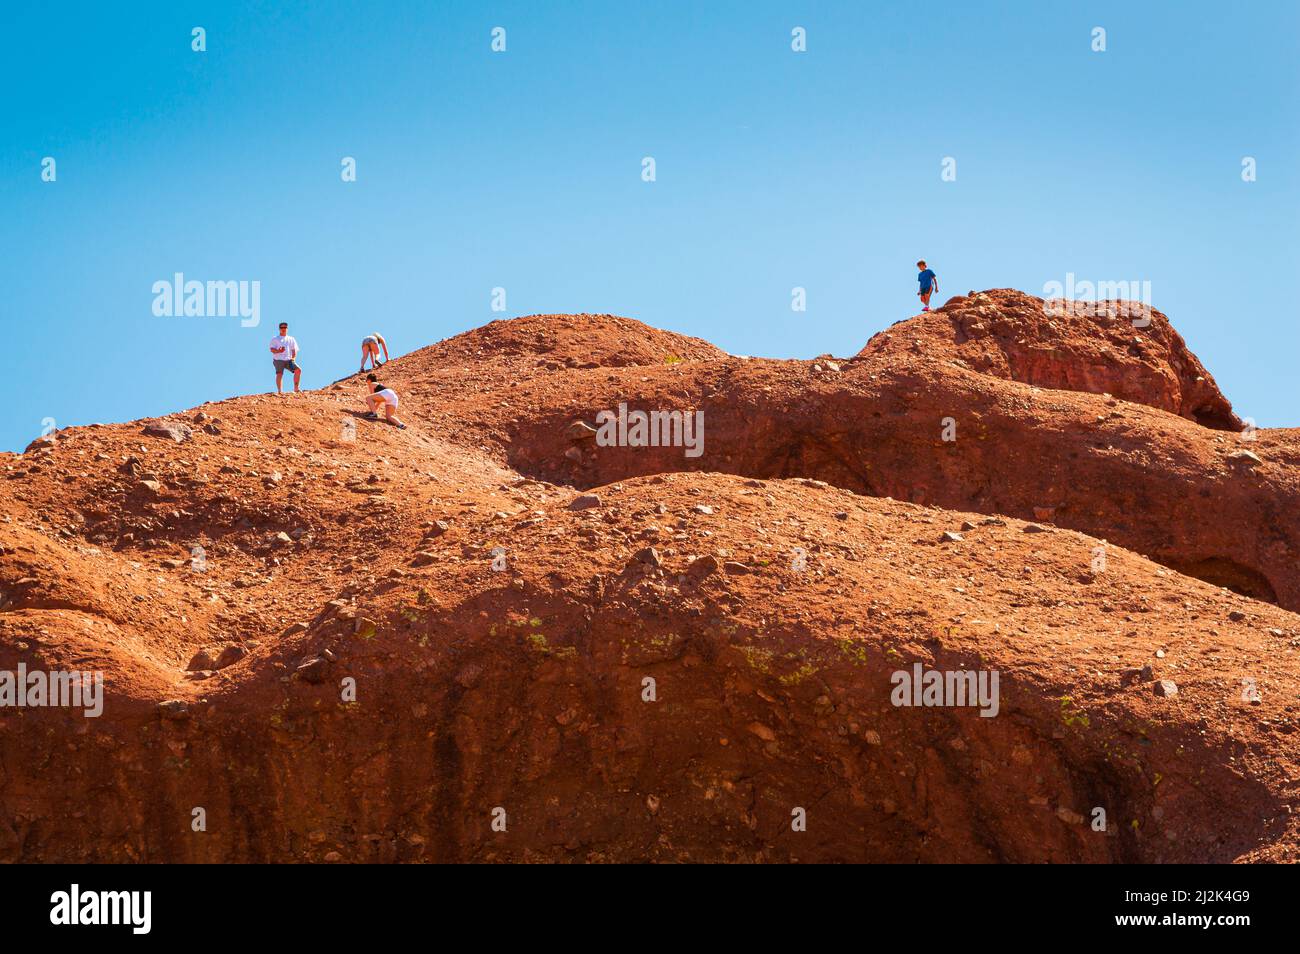 People climbing the rocks around Papago Park Hole in the Rock in Phoenix, Arizona, United States Stock Photo